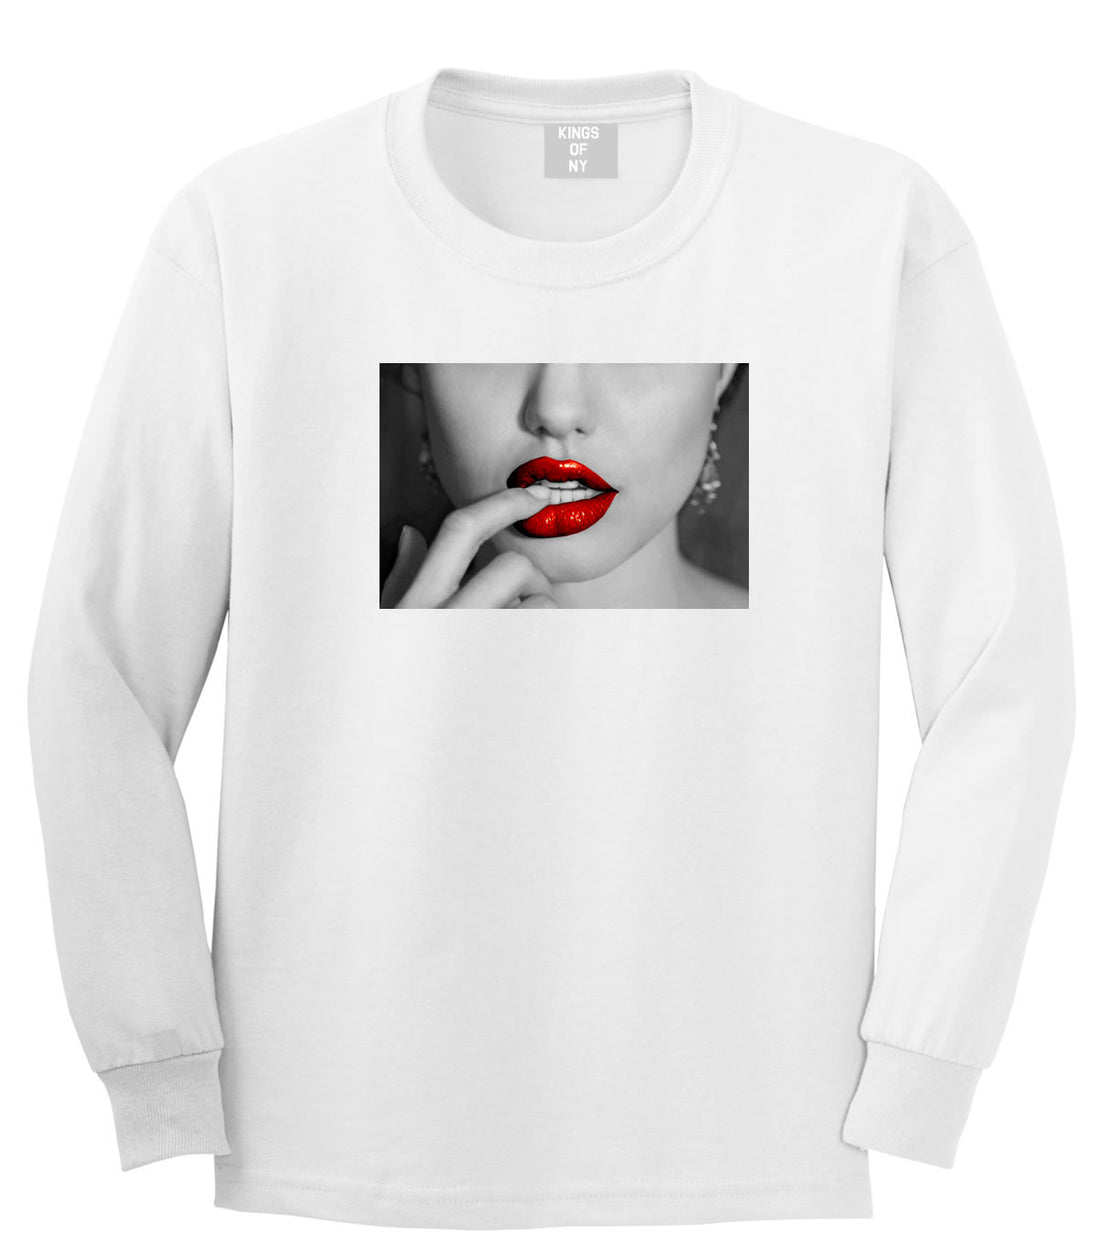  Angelina Red by Kings Of NY Lips Jolie Sexy Hot Picture Long Sleeve T-Shirt in White by Kings Of NY